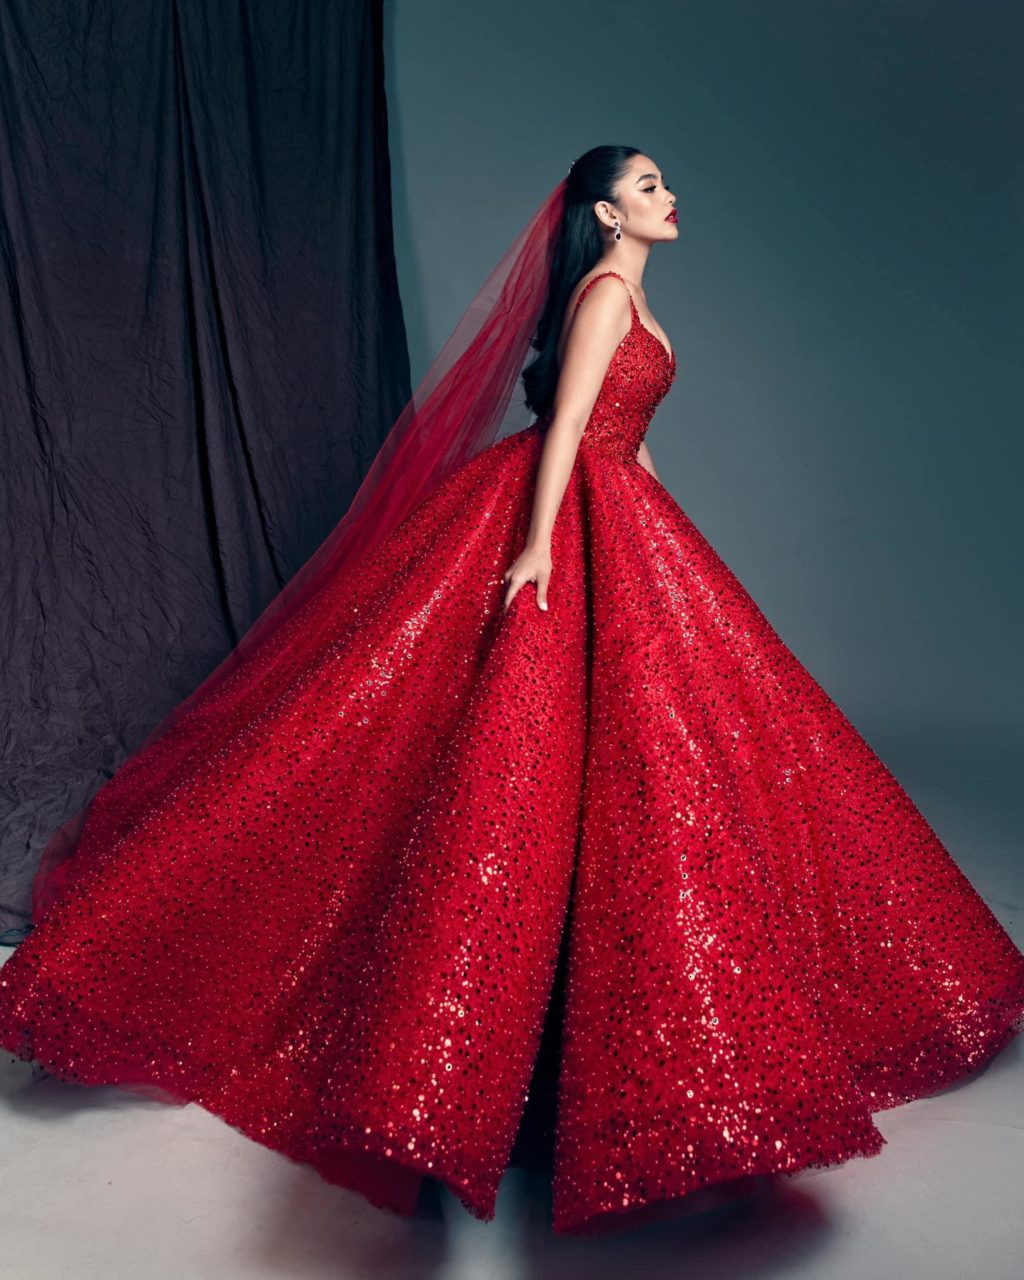 Andrea Brillantes in a red bridal gown.